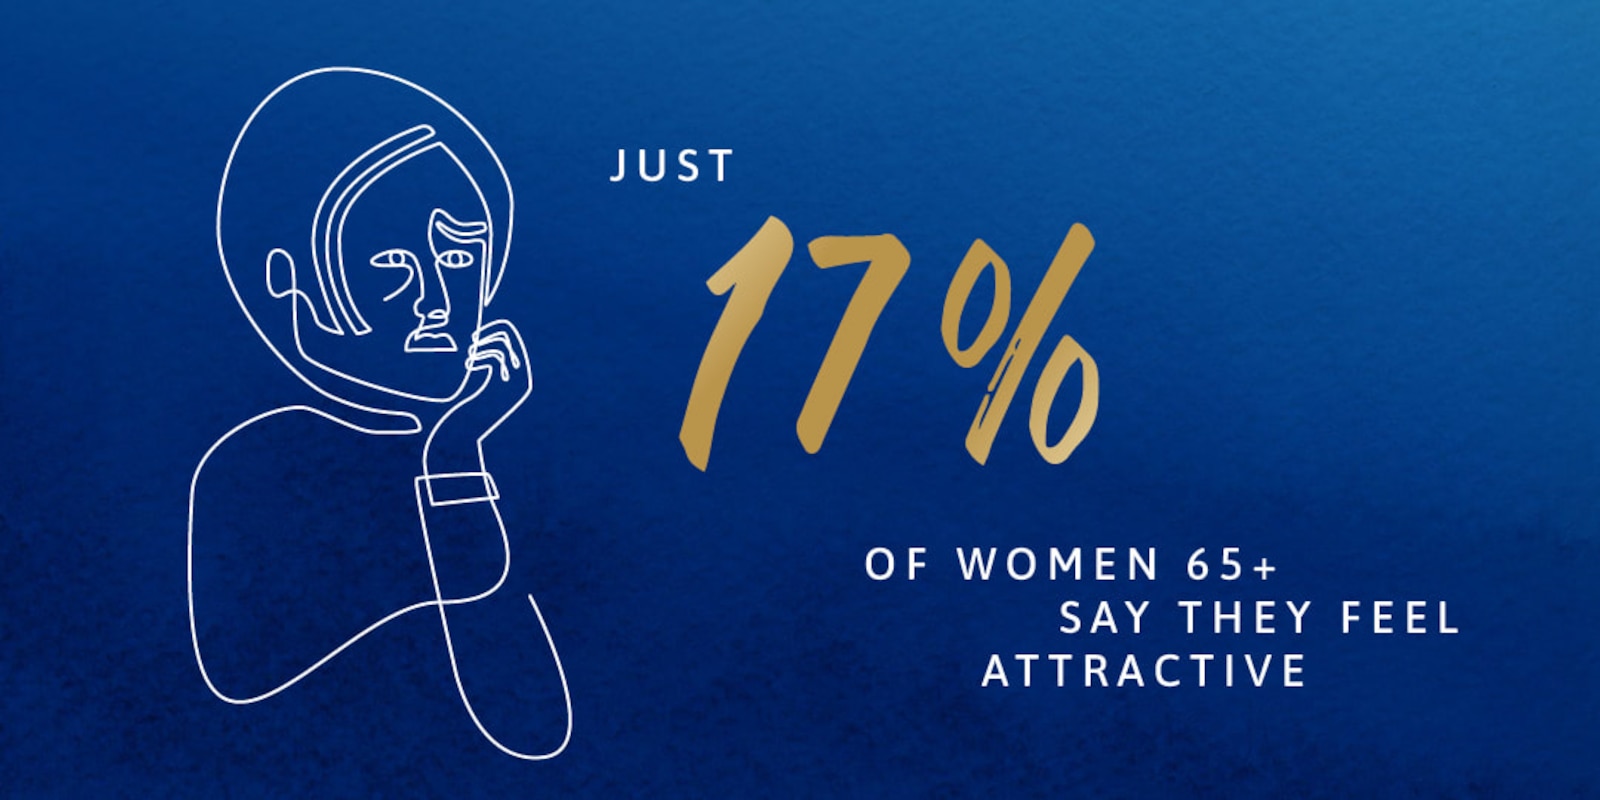 Just 17% of women 65+ say they feel attractive